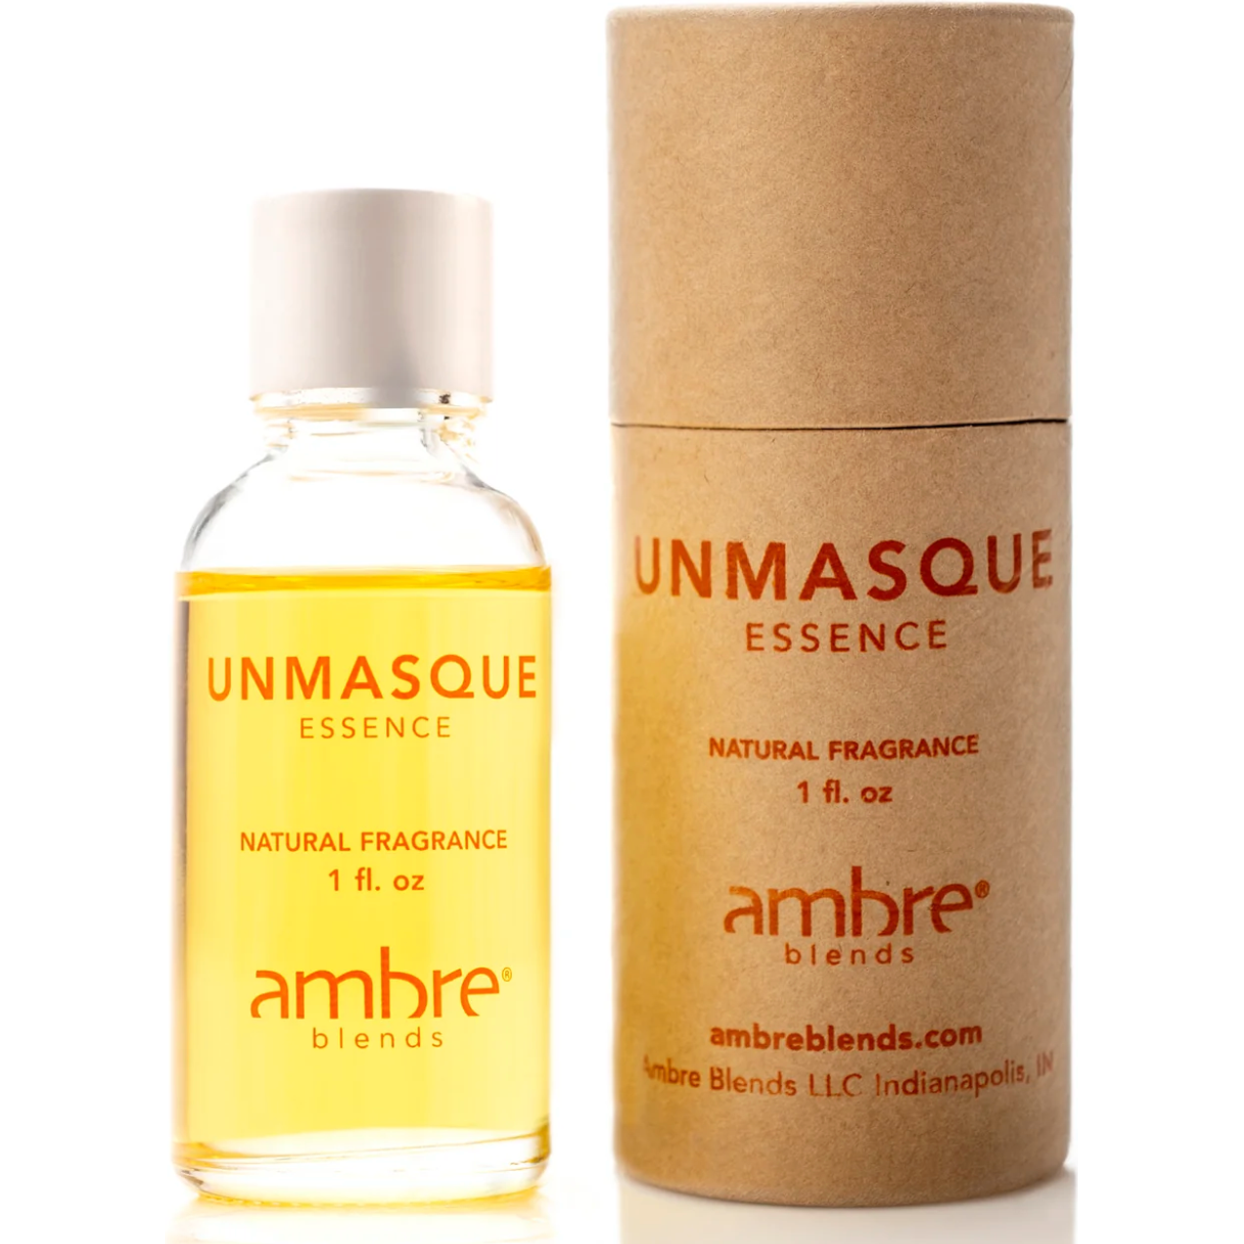 Ambre Pure Essence Oil - *Sold in Store Only